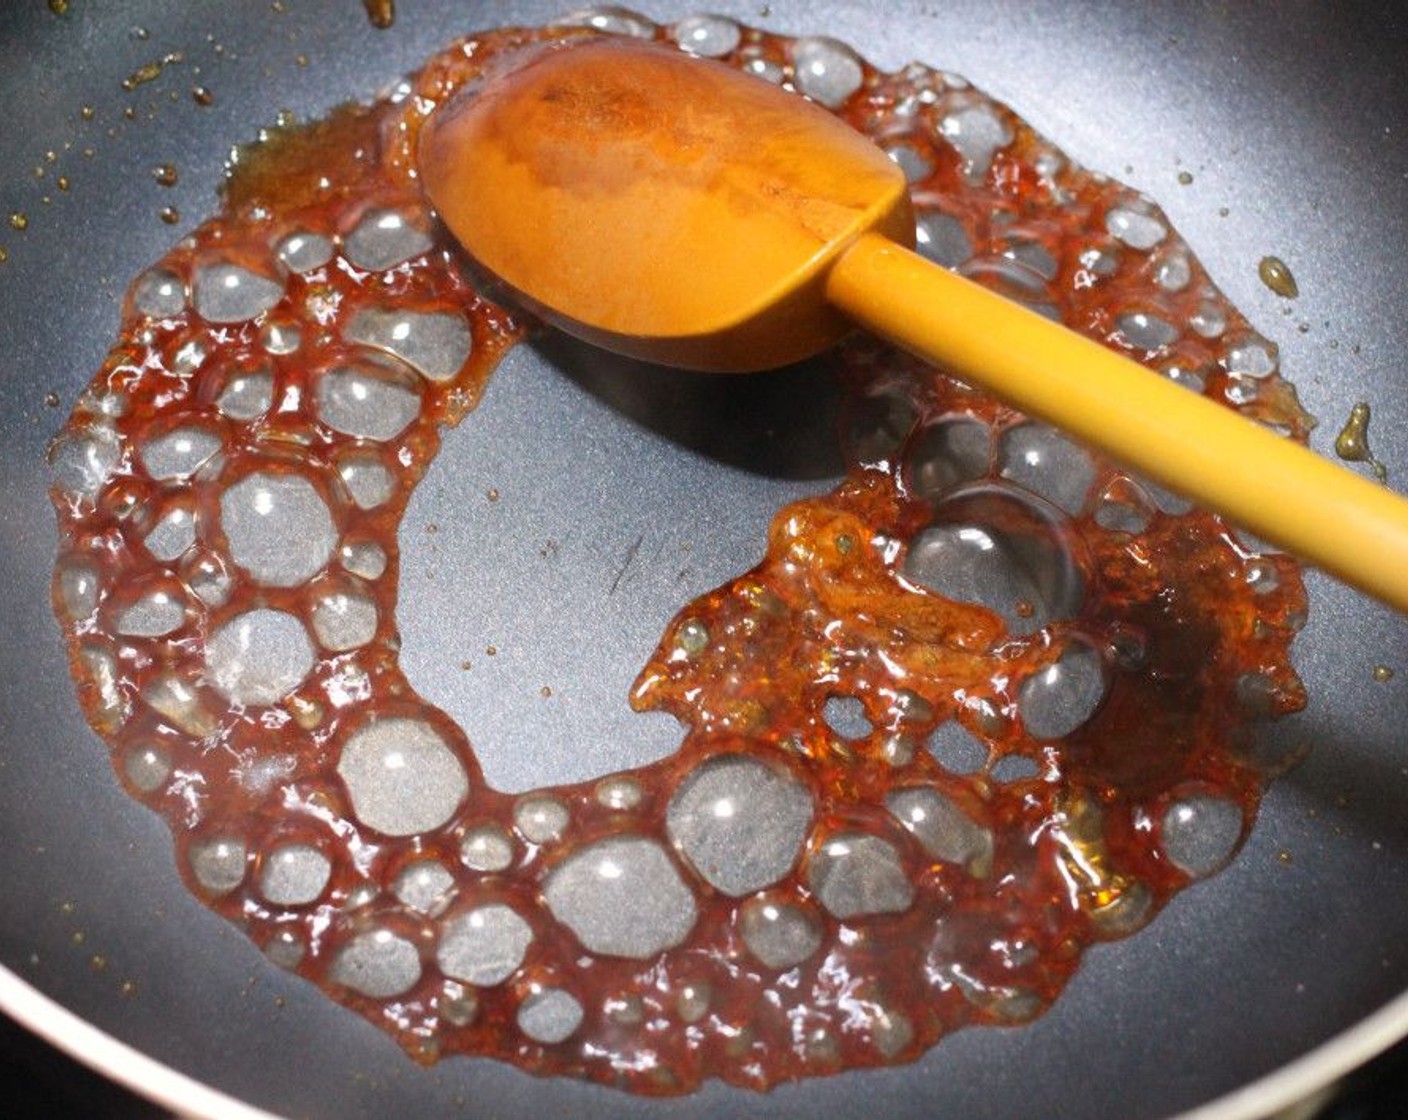 step 3 When caramelized to a golden brown, add Water (1/2 cup) carefully as this will splatter. Simmer while stirring until the lumps have dissolved and the sauce is smooth.